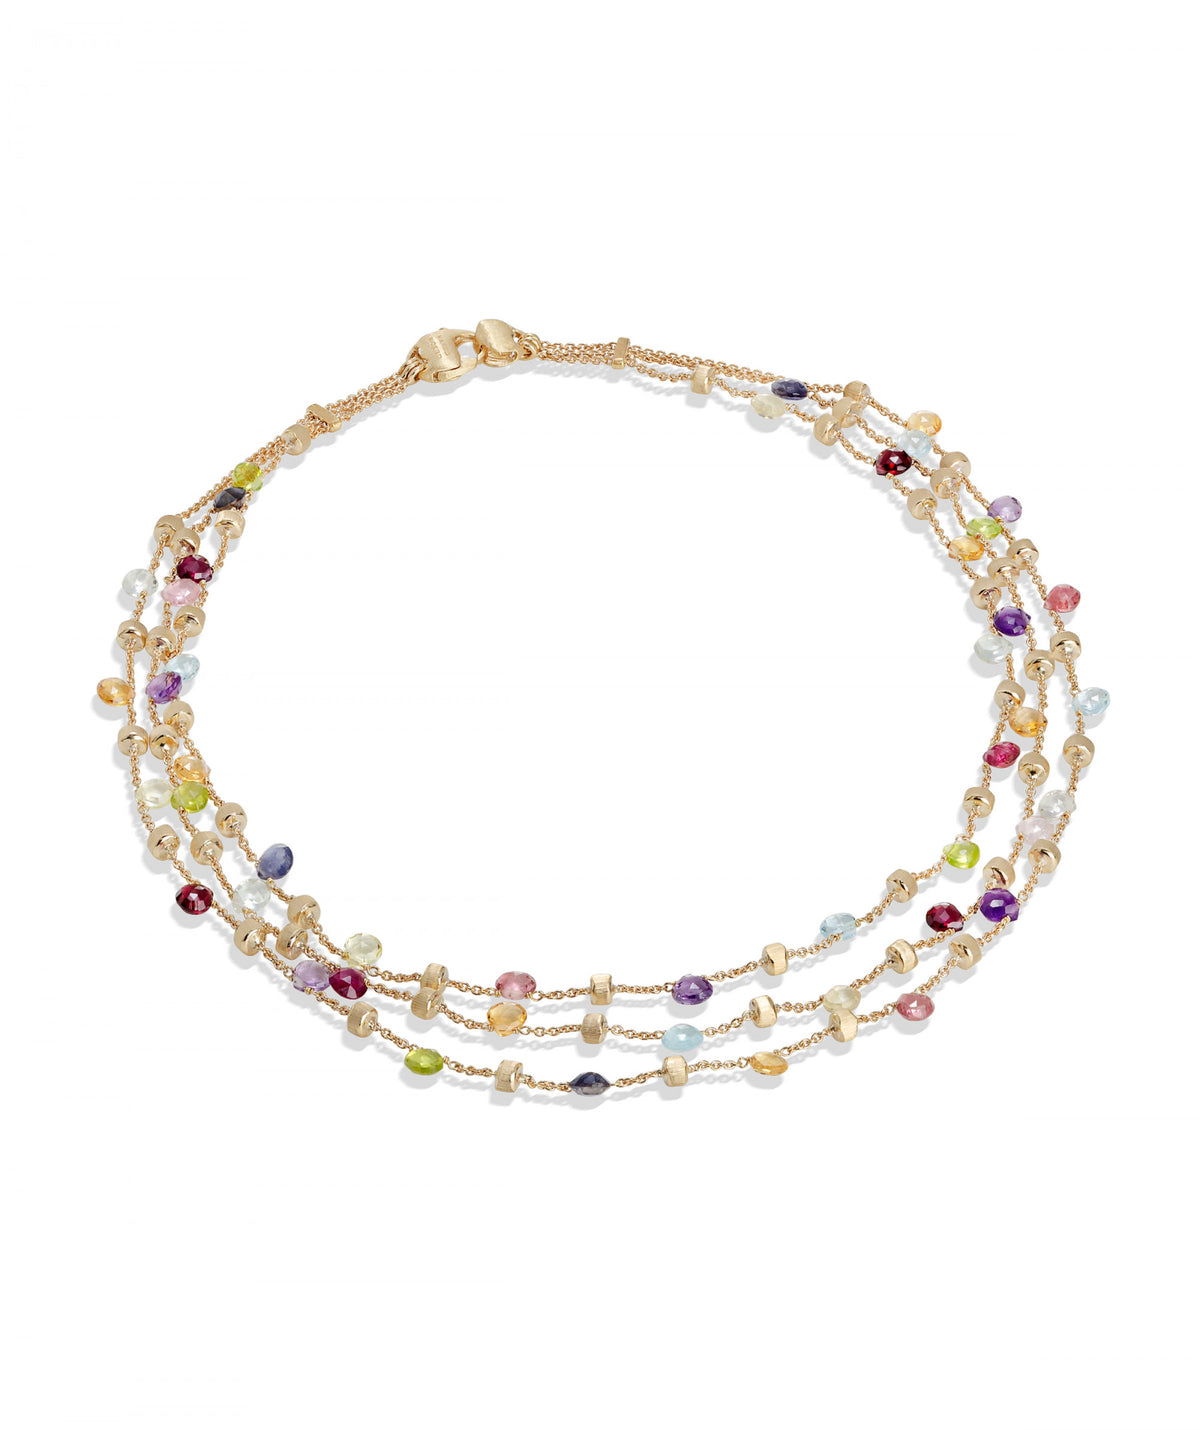 Paradise Necklace in 18k Yellow Gold with Gemstones Three Strand - Orsini Jewellers NZ